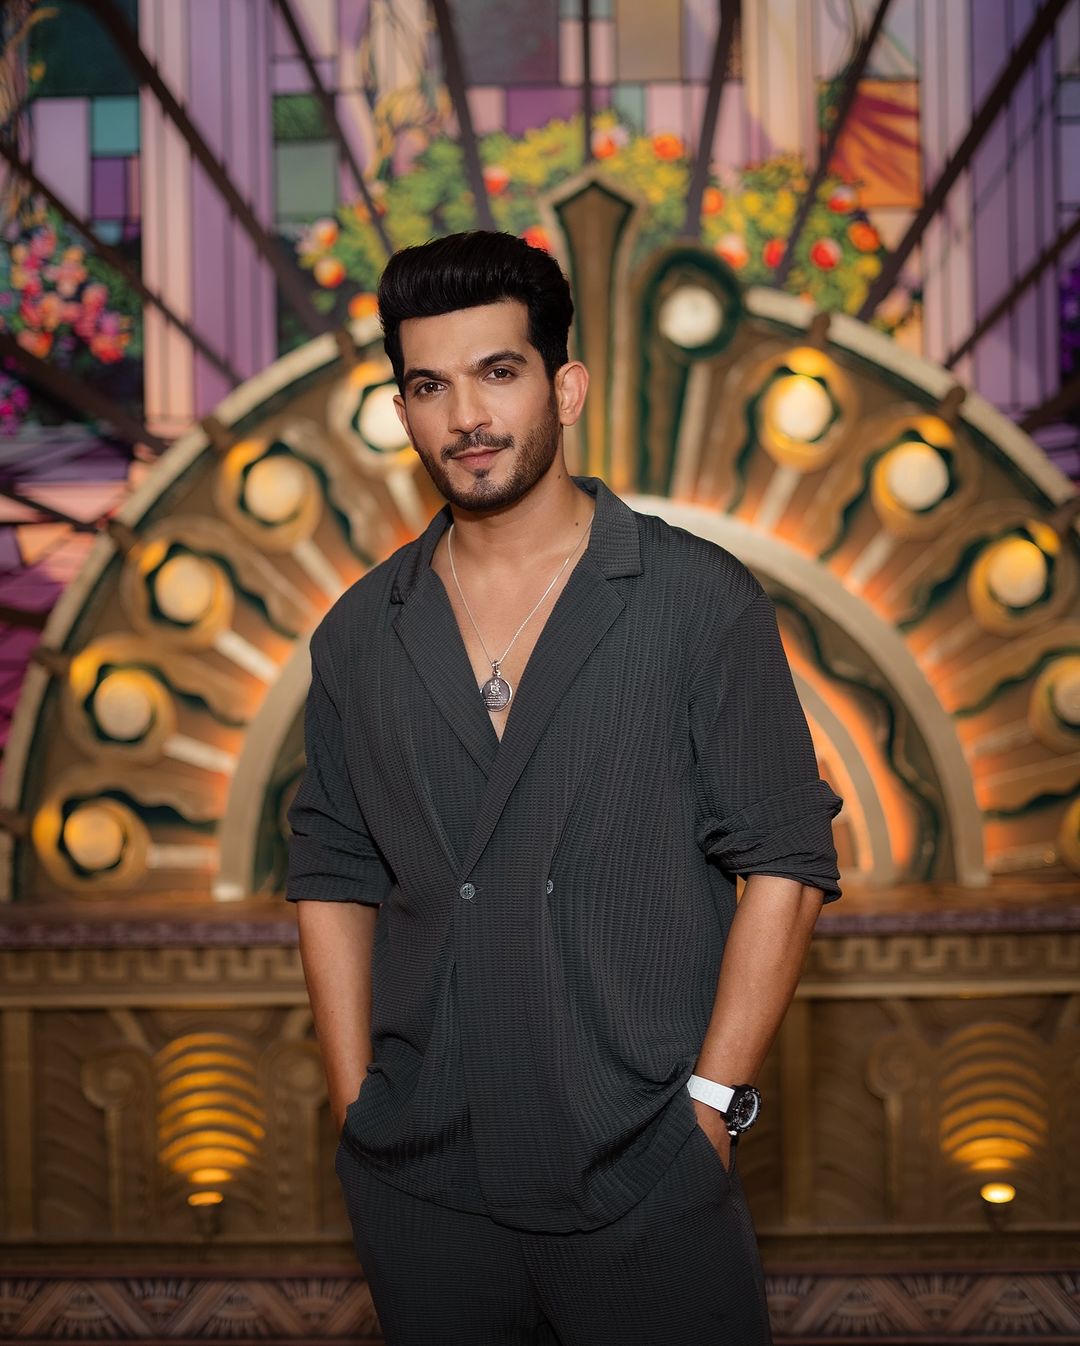 Check About The Heart-Warming Moment Of Pyaar Ka Pehla Adhyaya: Shiv Shakti’s Cast Lunch Arranged By Arjun Bijlani. They All Celebrated The One-Year Success Of This Serial. Read Inside To Learn More About It!